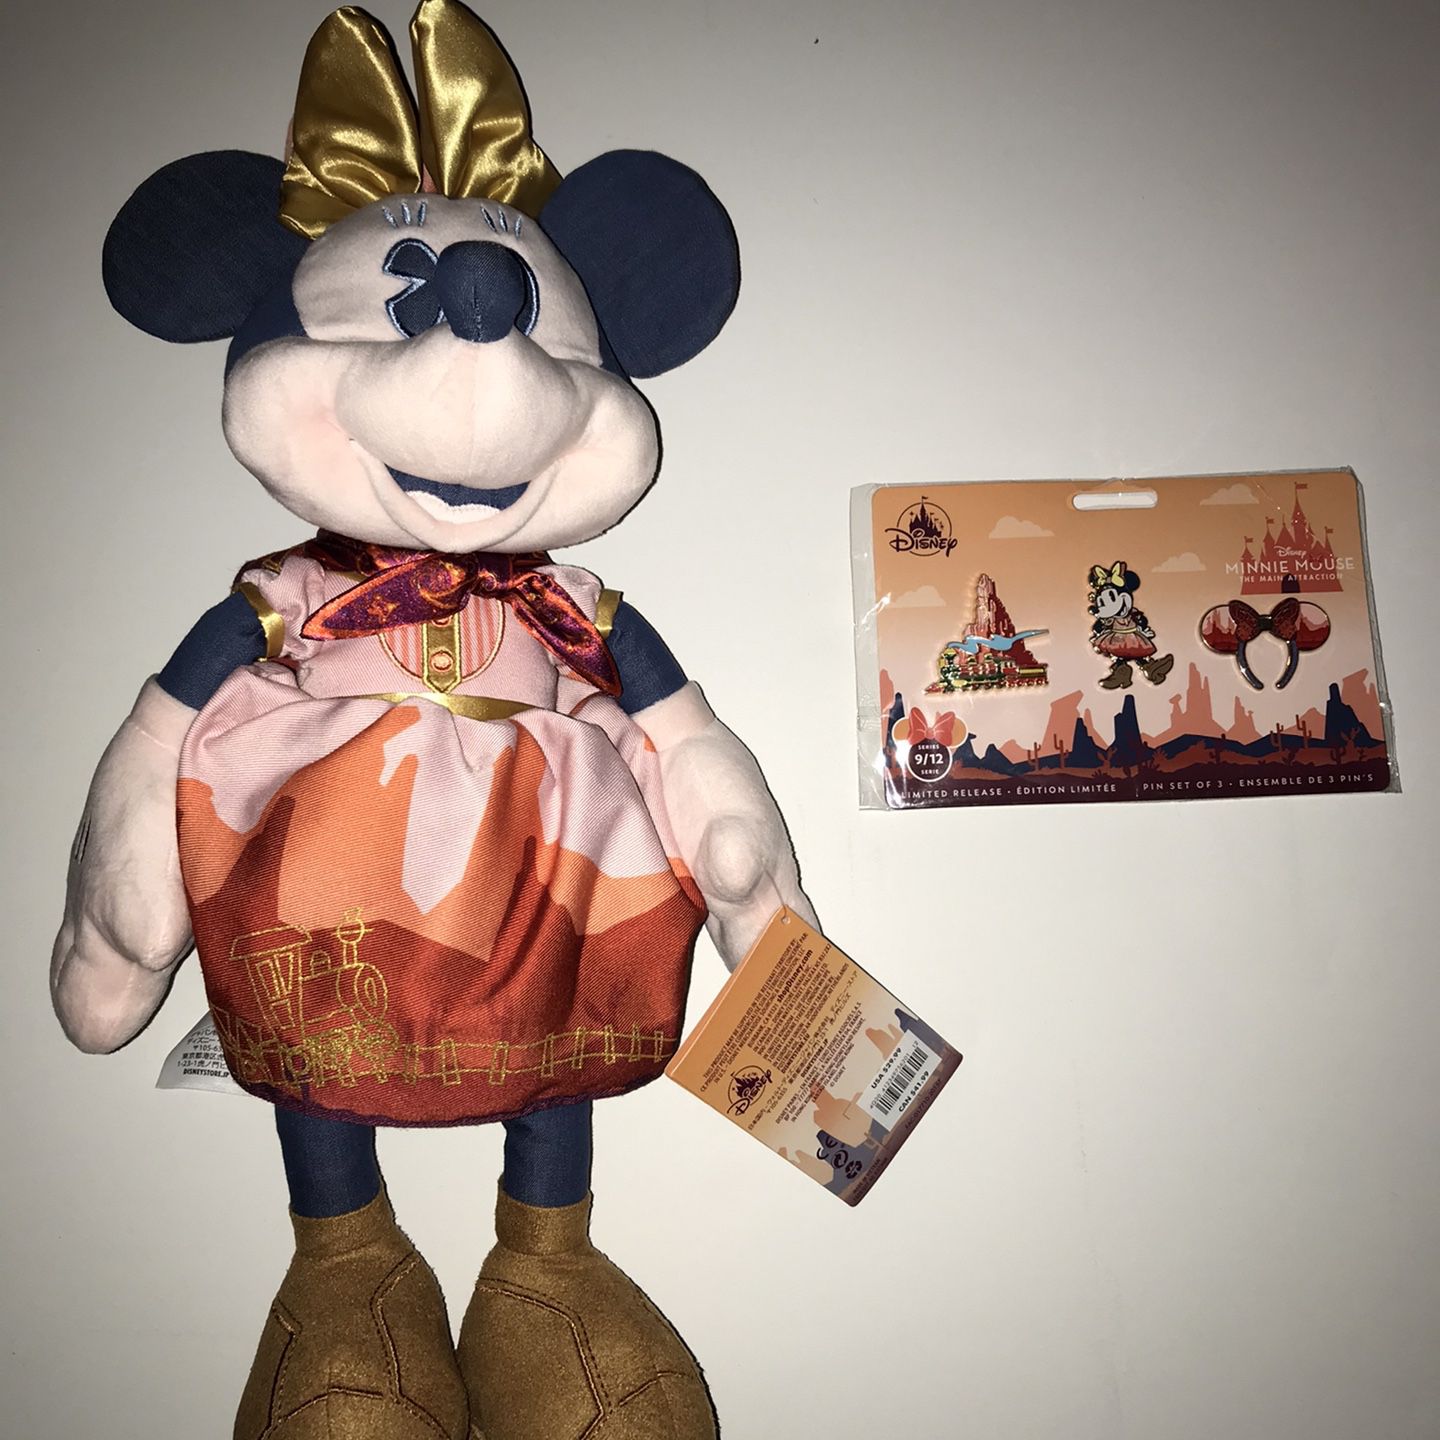 Disneyland Disney Store Minnie Mouse Main Attraction The Big Thunder Railroad Plush And Pin Set !!!!!